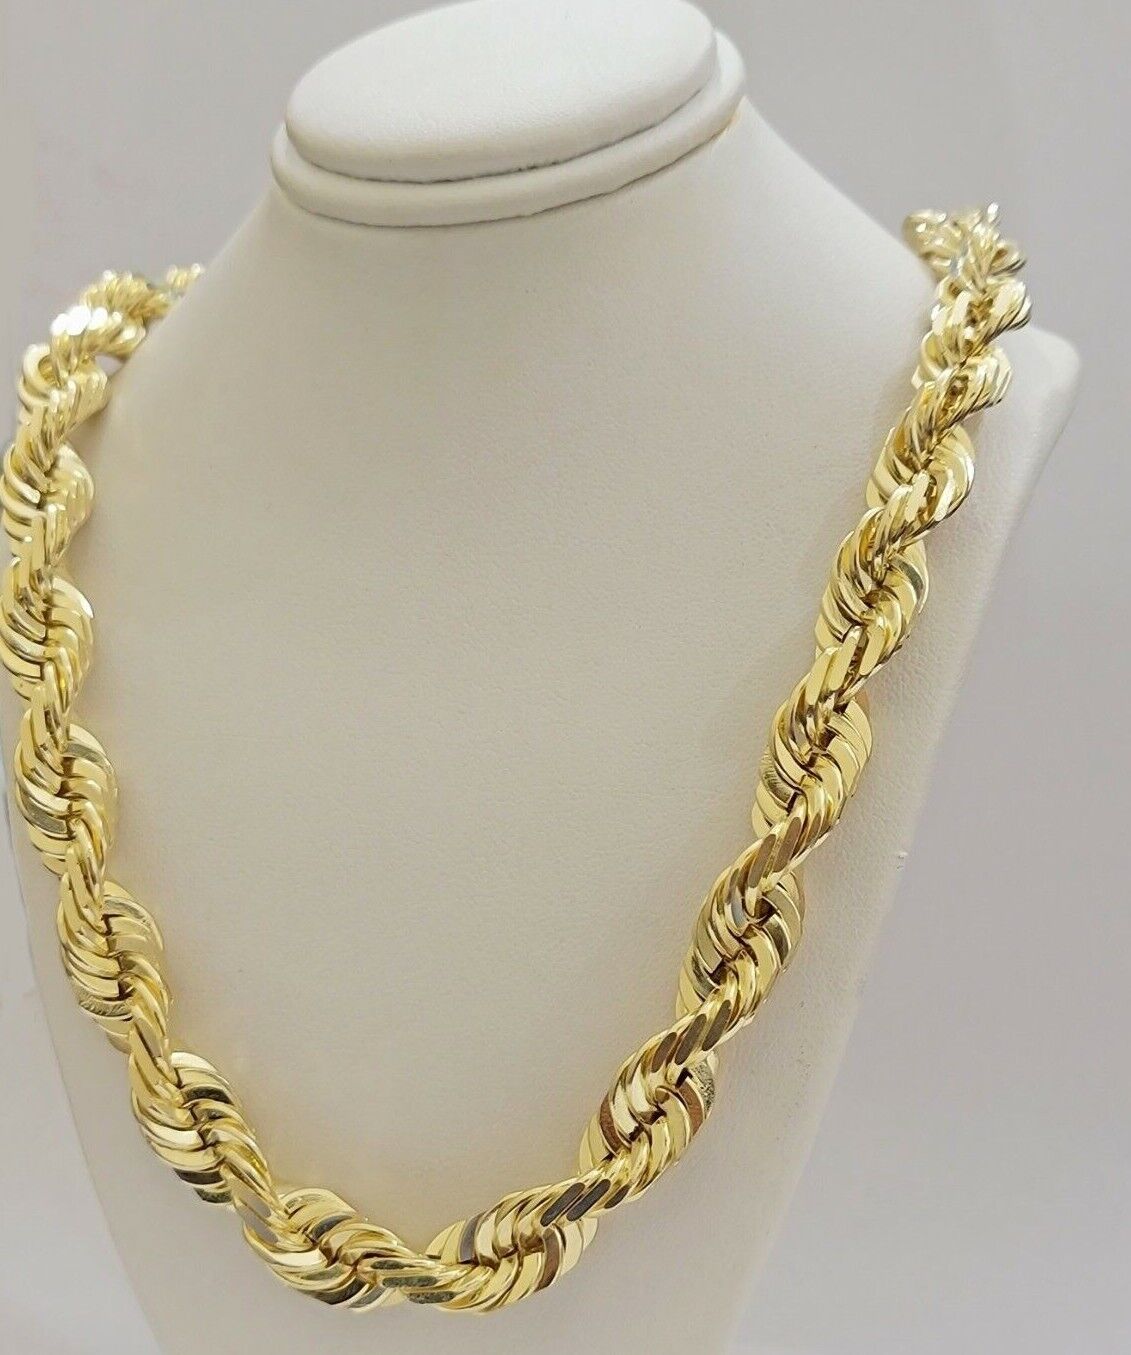 14mm Solid 10k Yellow Gold Rope Chain Necklace 28" Mens Thick & Heavy Shiny REAL